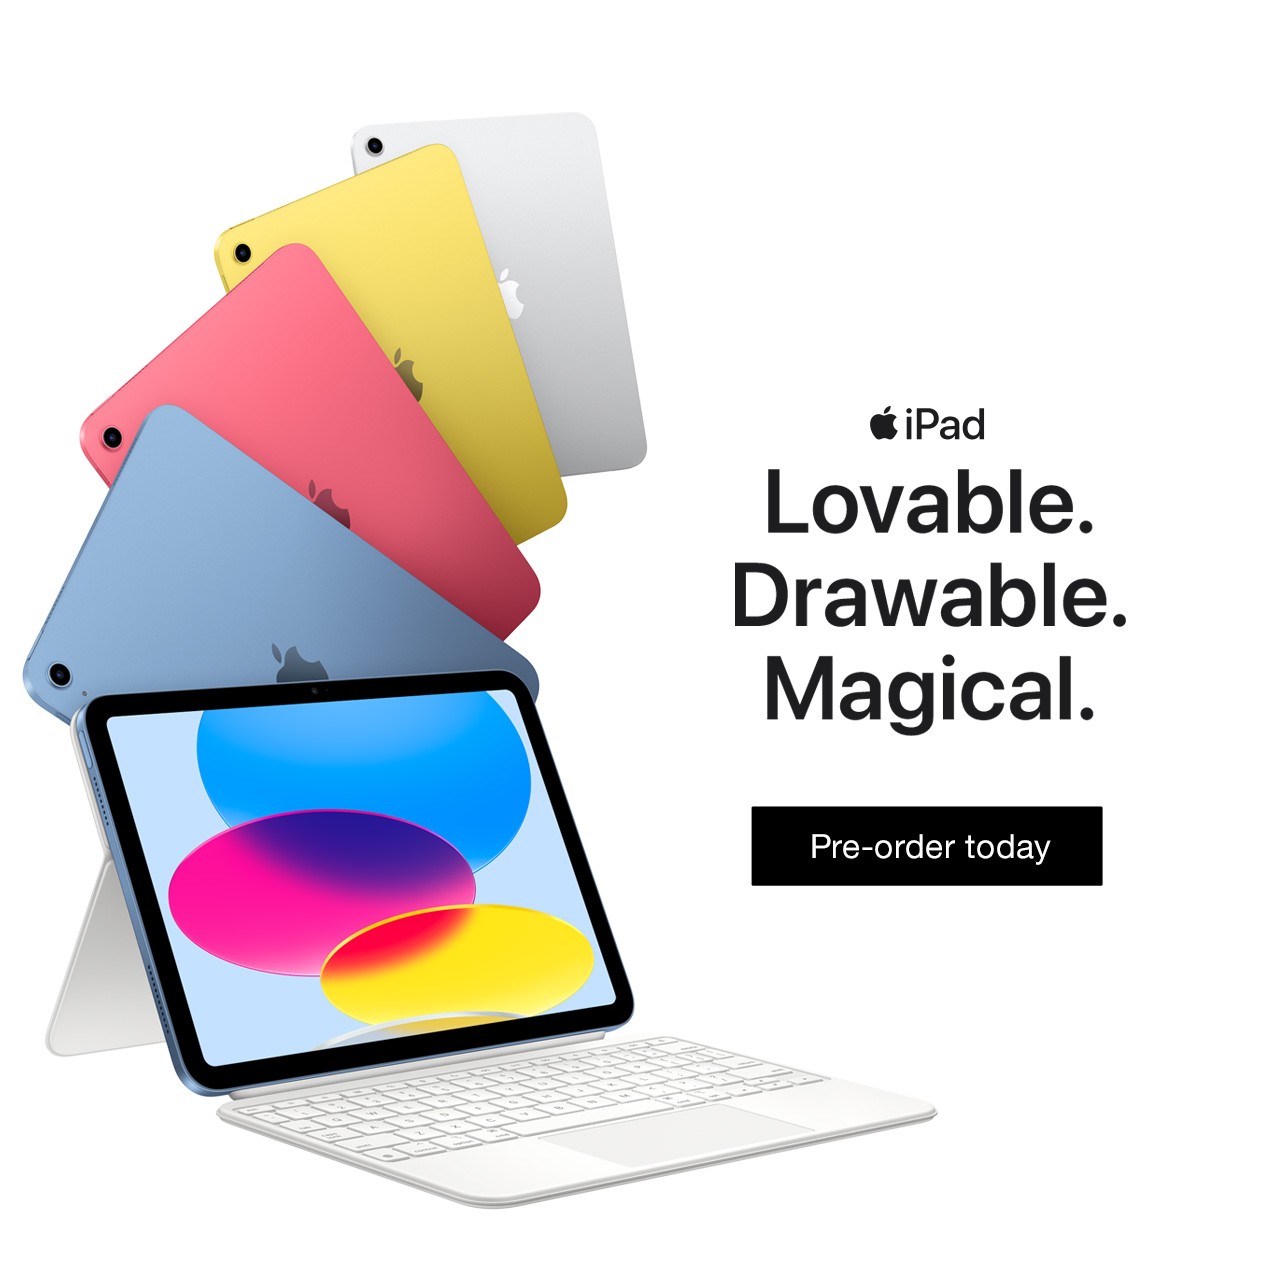 Apple iPad Lovable. Drawable. Magical. Pre-order today